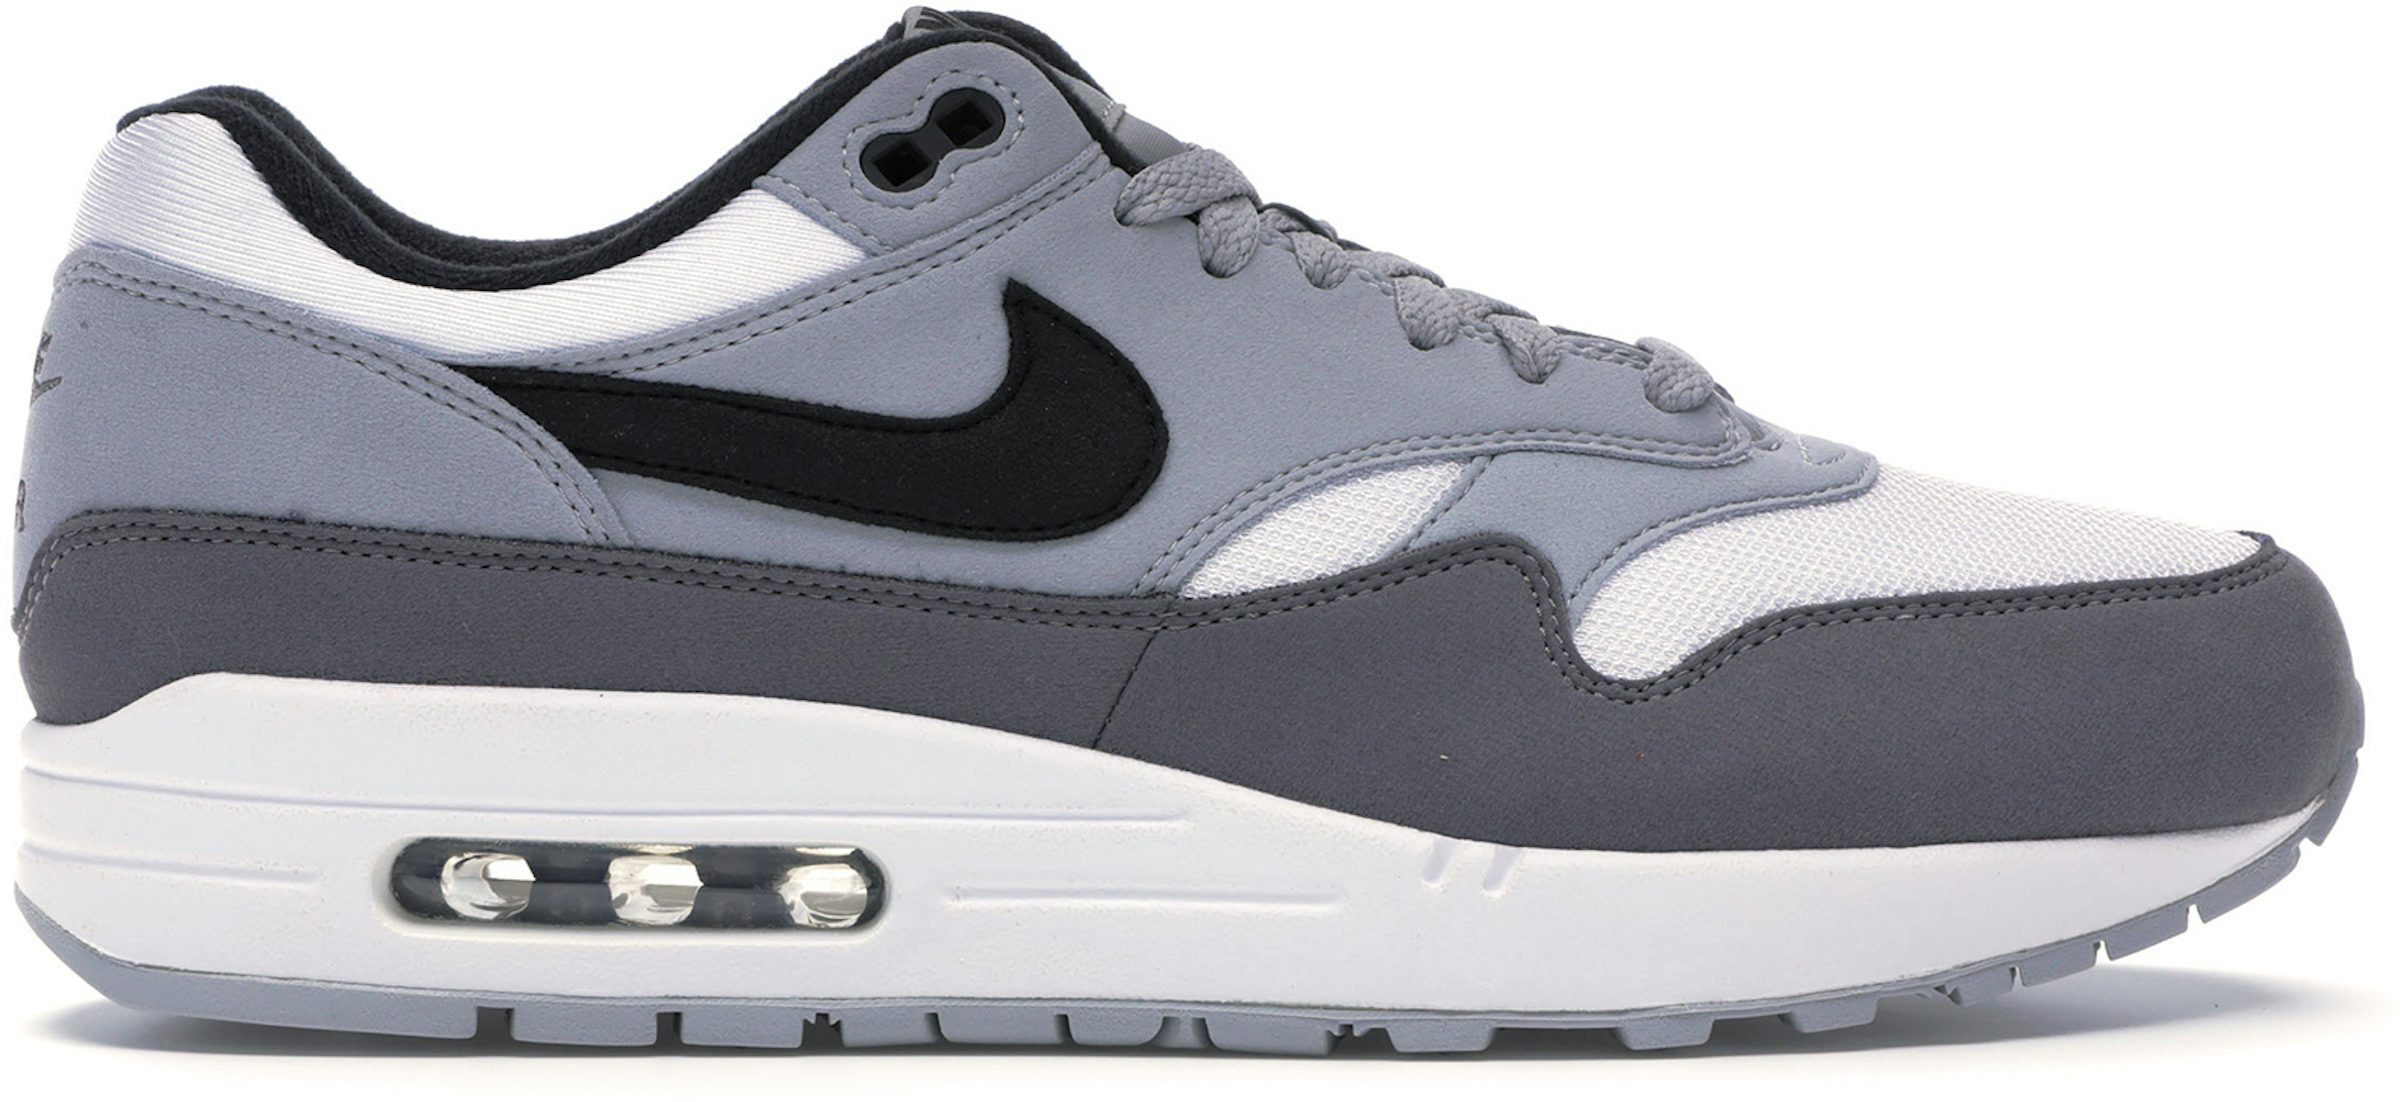 Læsbarhed Patronise Investere Nike Air Max 1 White Black Wolf Grey Men's - AH8145-101 - US